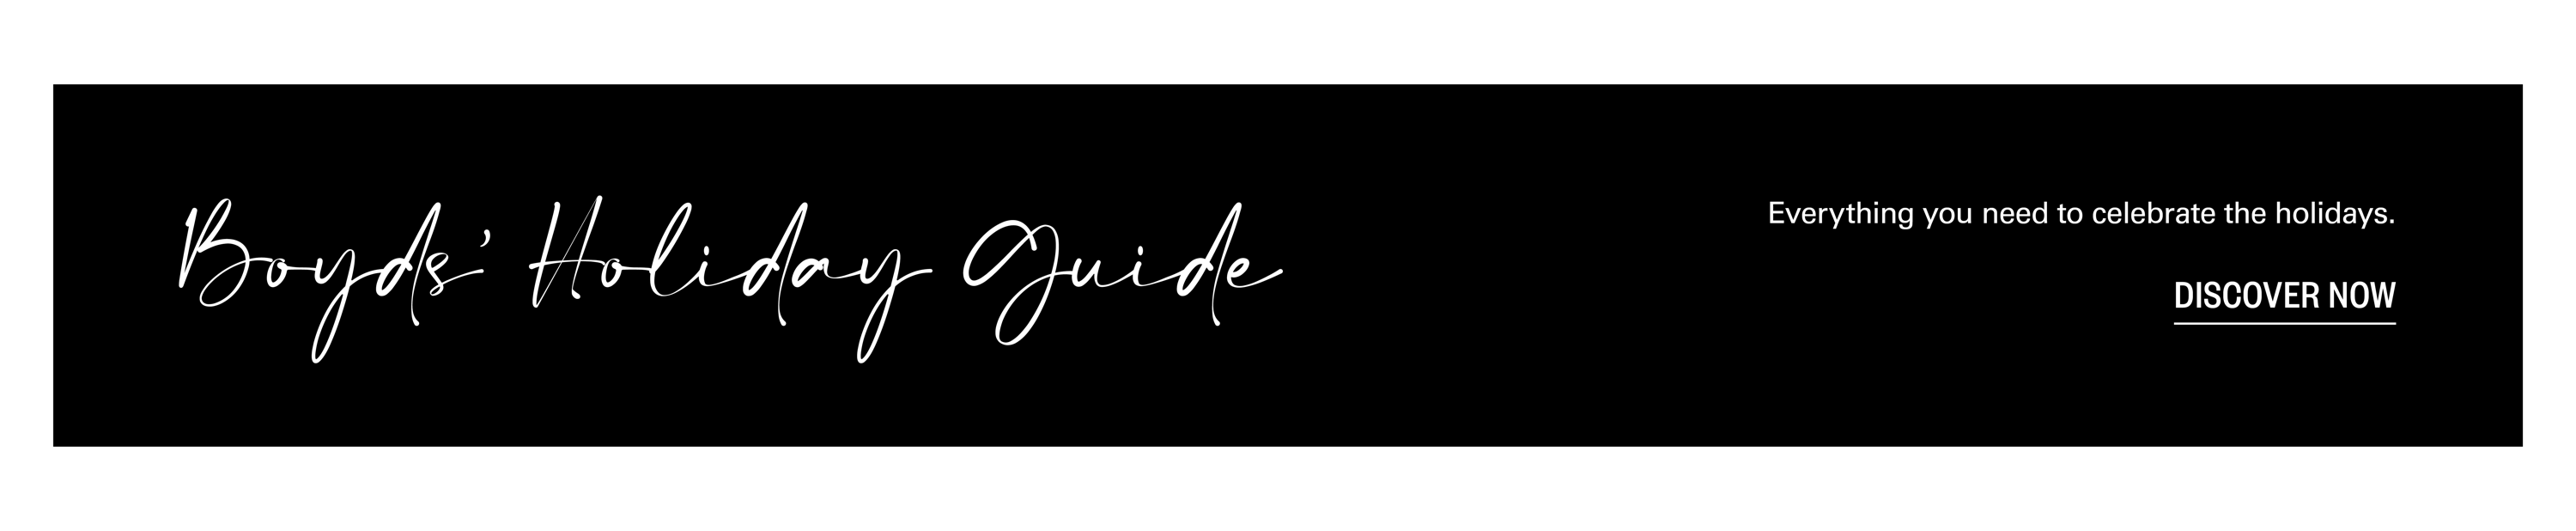 Boyds Holiday Guide 